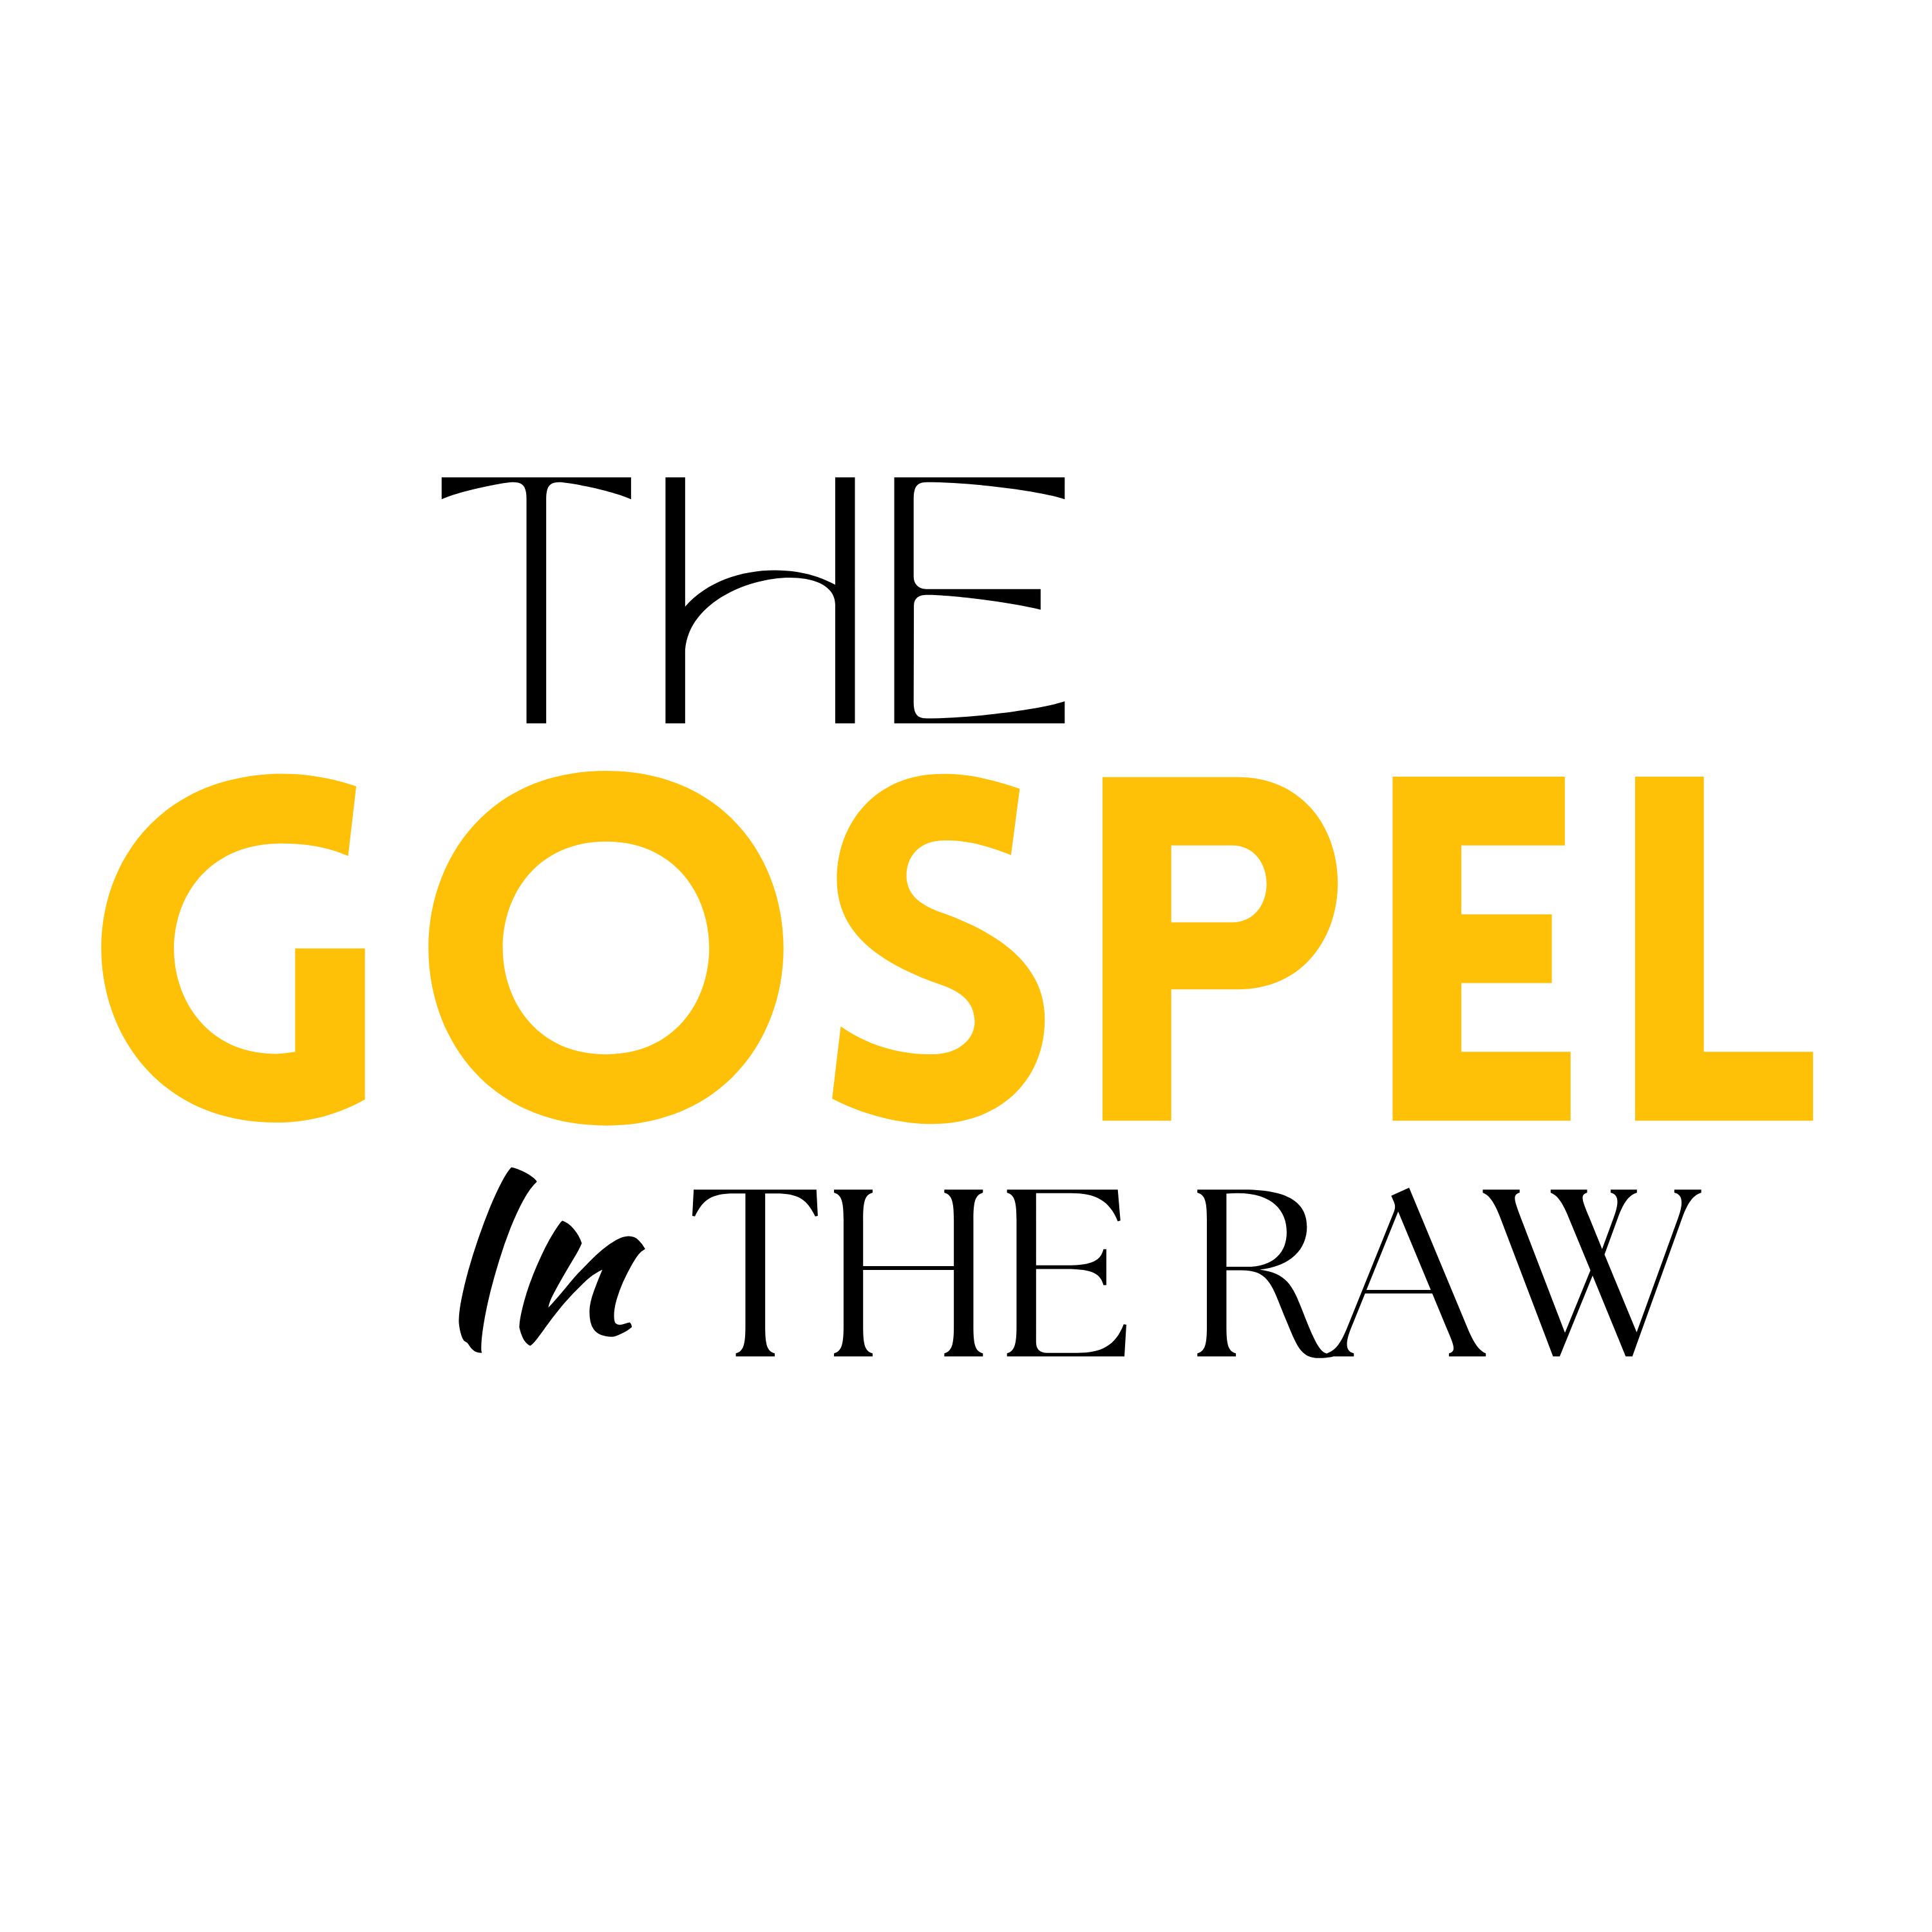 The Gospel in the Raw